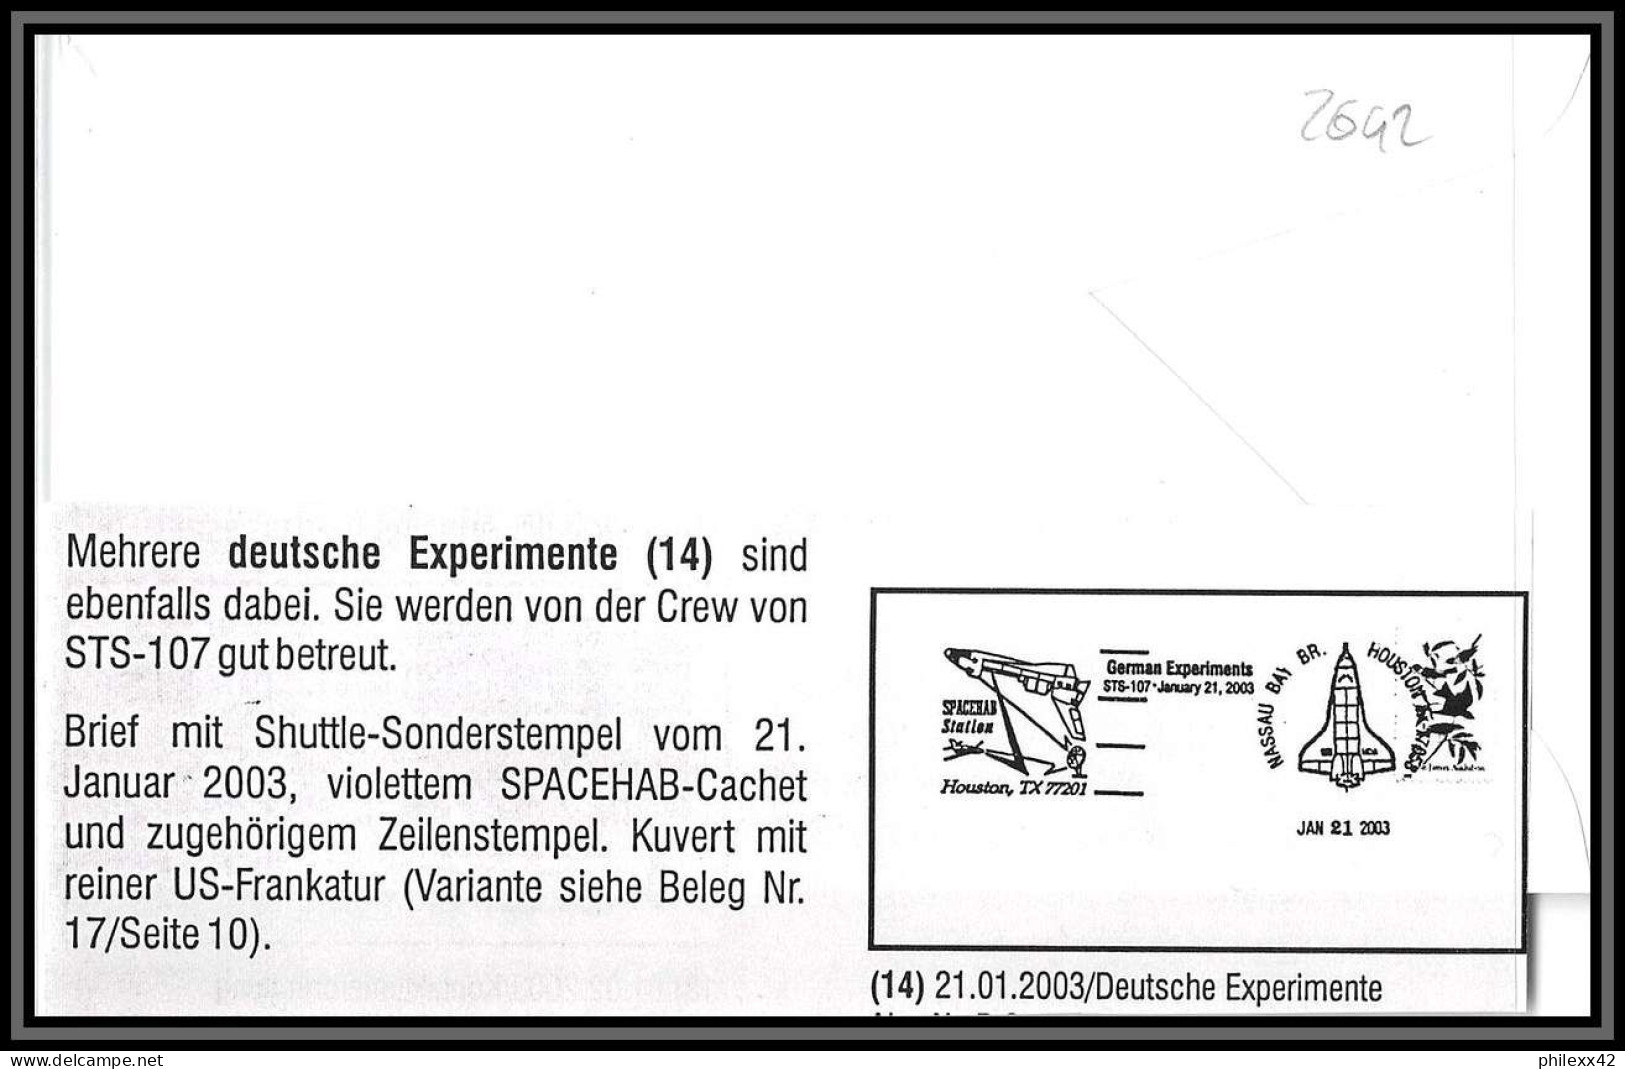 2692 Espace (space) Lettre (cover) USA Sts-107 Columbia Shuttle 21/1/2003 German Experiments Allemagne (germany Bund) - Verenigde Staten